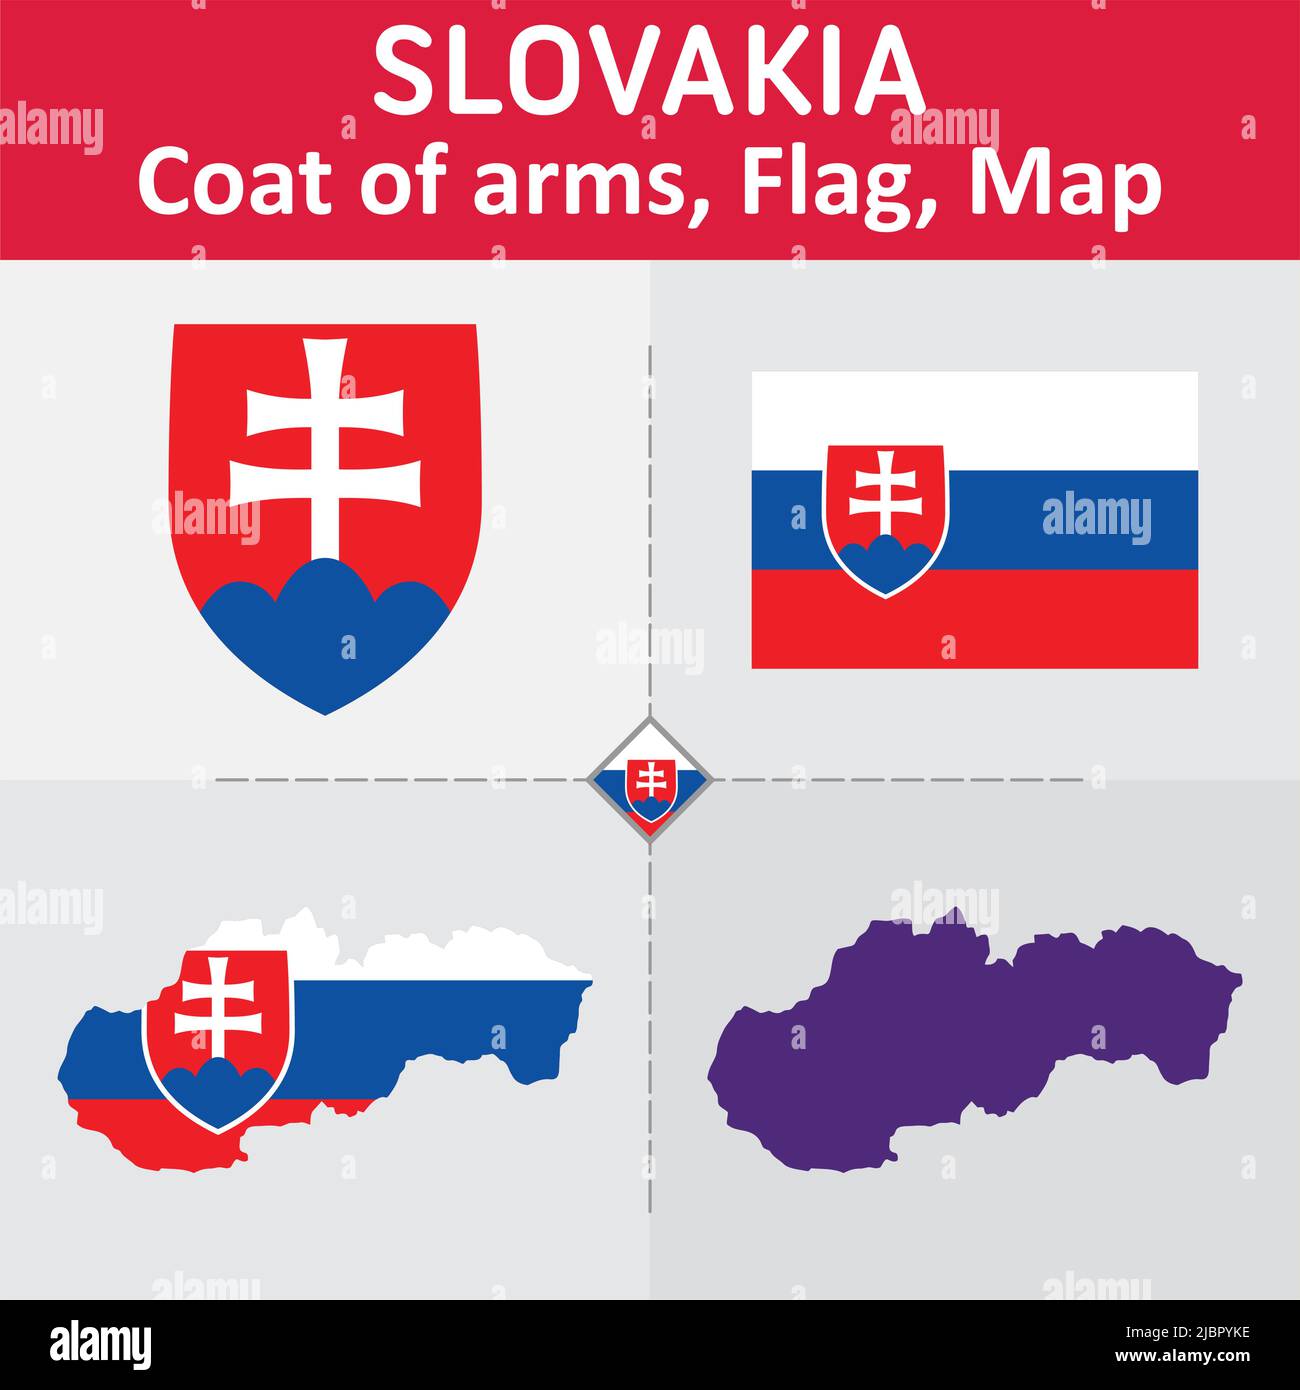 Slovakia Coat of Arms, Flag and Map Stock Vector